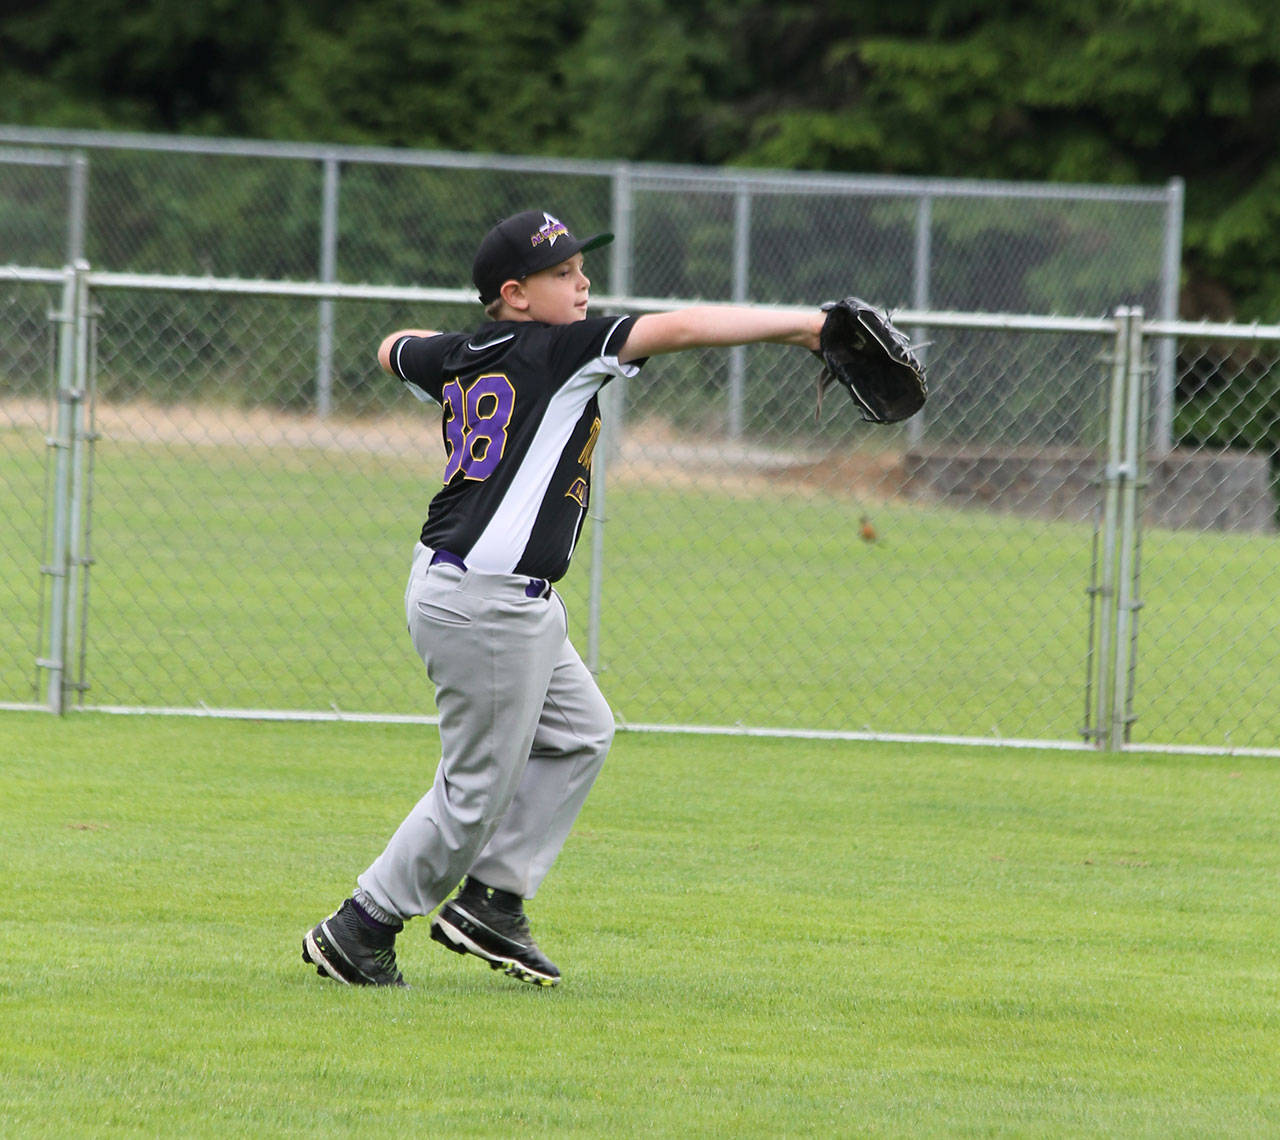 Left fielder Brayden McGhee tosses the ball back to the infield in Sunday’s game. (Photo by Jim Waller/Whidbey News-Times)